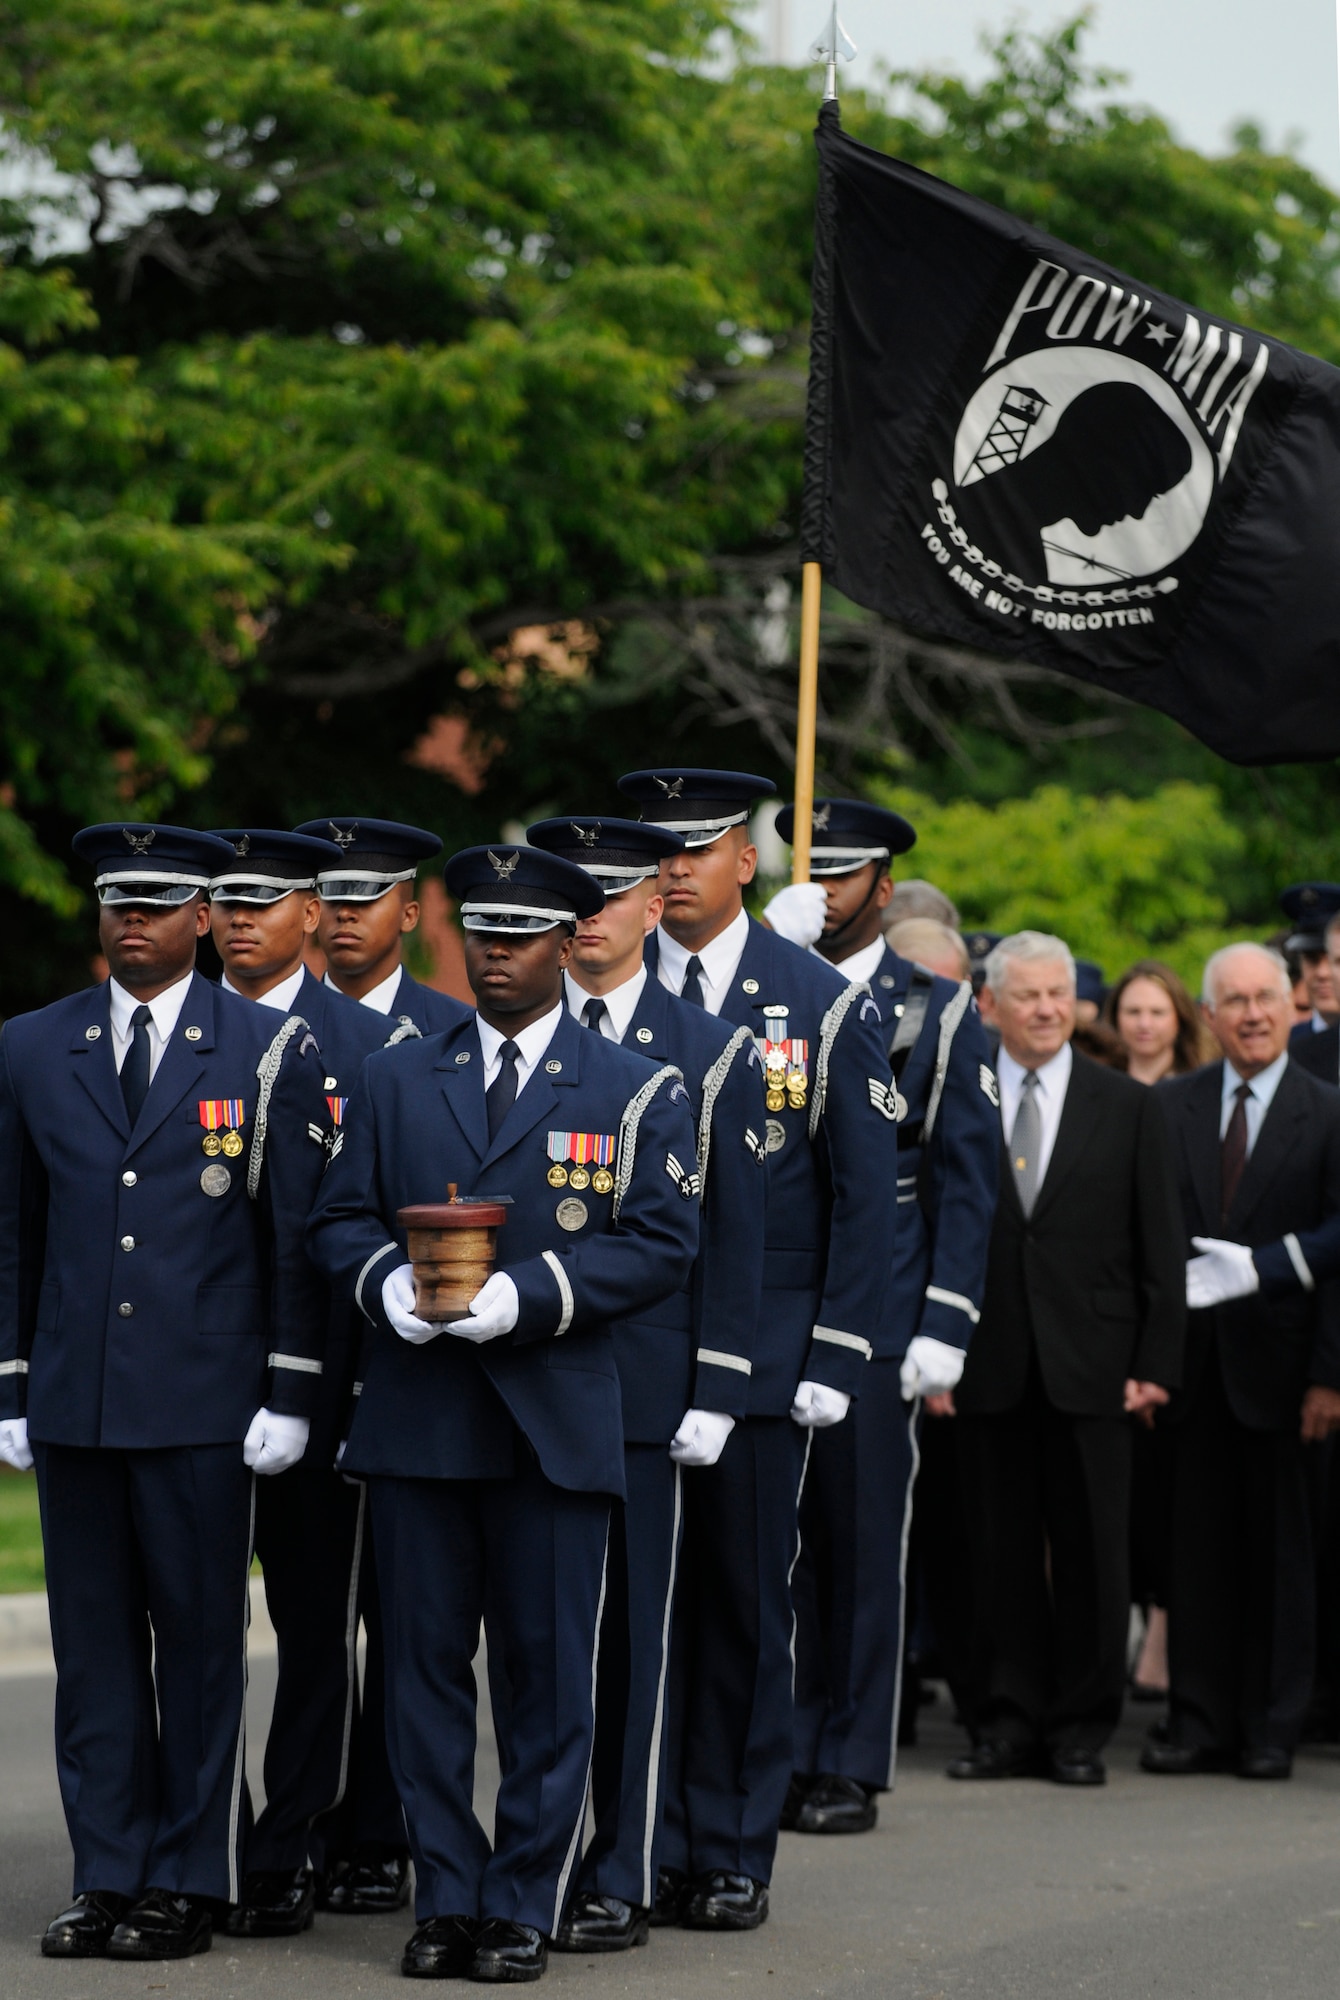 Members of a U.S. Air Force Honor Guard body bearer’s element carry the remains of former Chief Master Sgt. of the Air Force Paul W. Airey, during a funeral in his honor May 28, at Arlington National Cemetery in Arlington, Va.  Former CMSAF Airey was adviser to Secretary of the Air Force Harold Brown and Chief of Staff of the Air Force Gen. John P. McConnell on matters concerning welfare, effective utilization and progress of the enlisted members of the Air Force. Former CMSAF Airey was the first chief master sergeant appointed to this ultimate noncommissioned officer position and was selected from among 21 major air command nominees to become the first chief master sergeant of the Air Force. (U.S. Air Force photo by Staff Sgt. Dan DeCook)